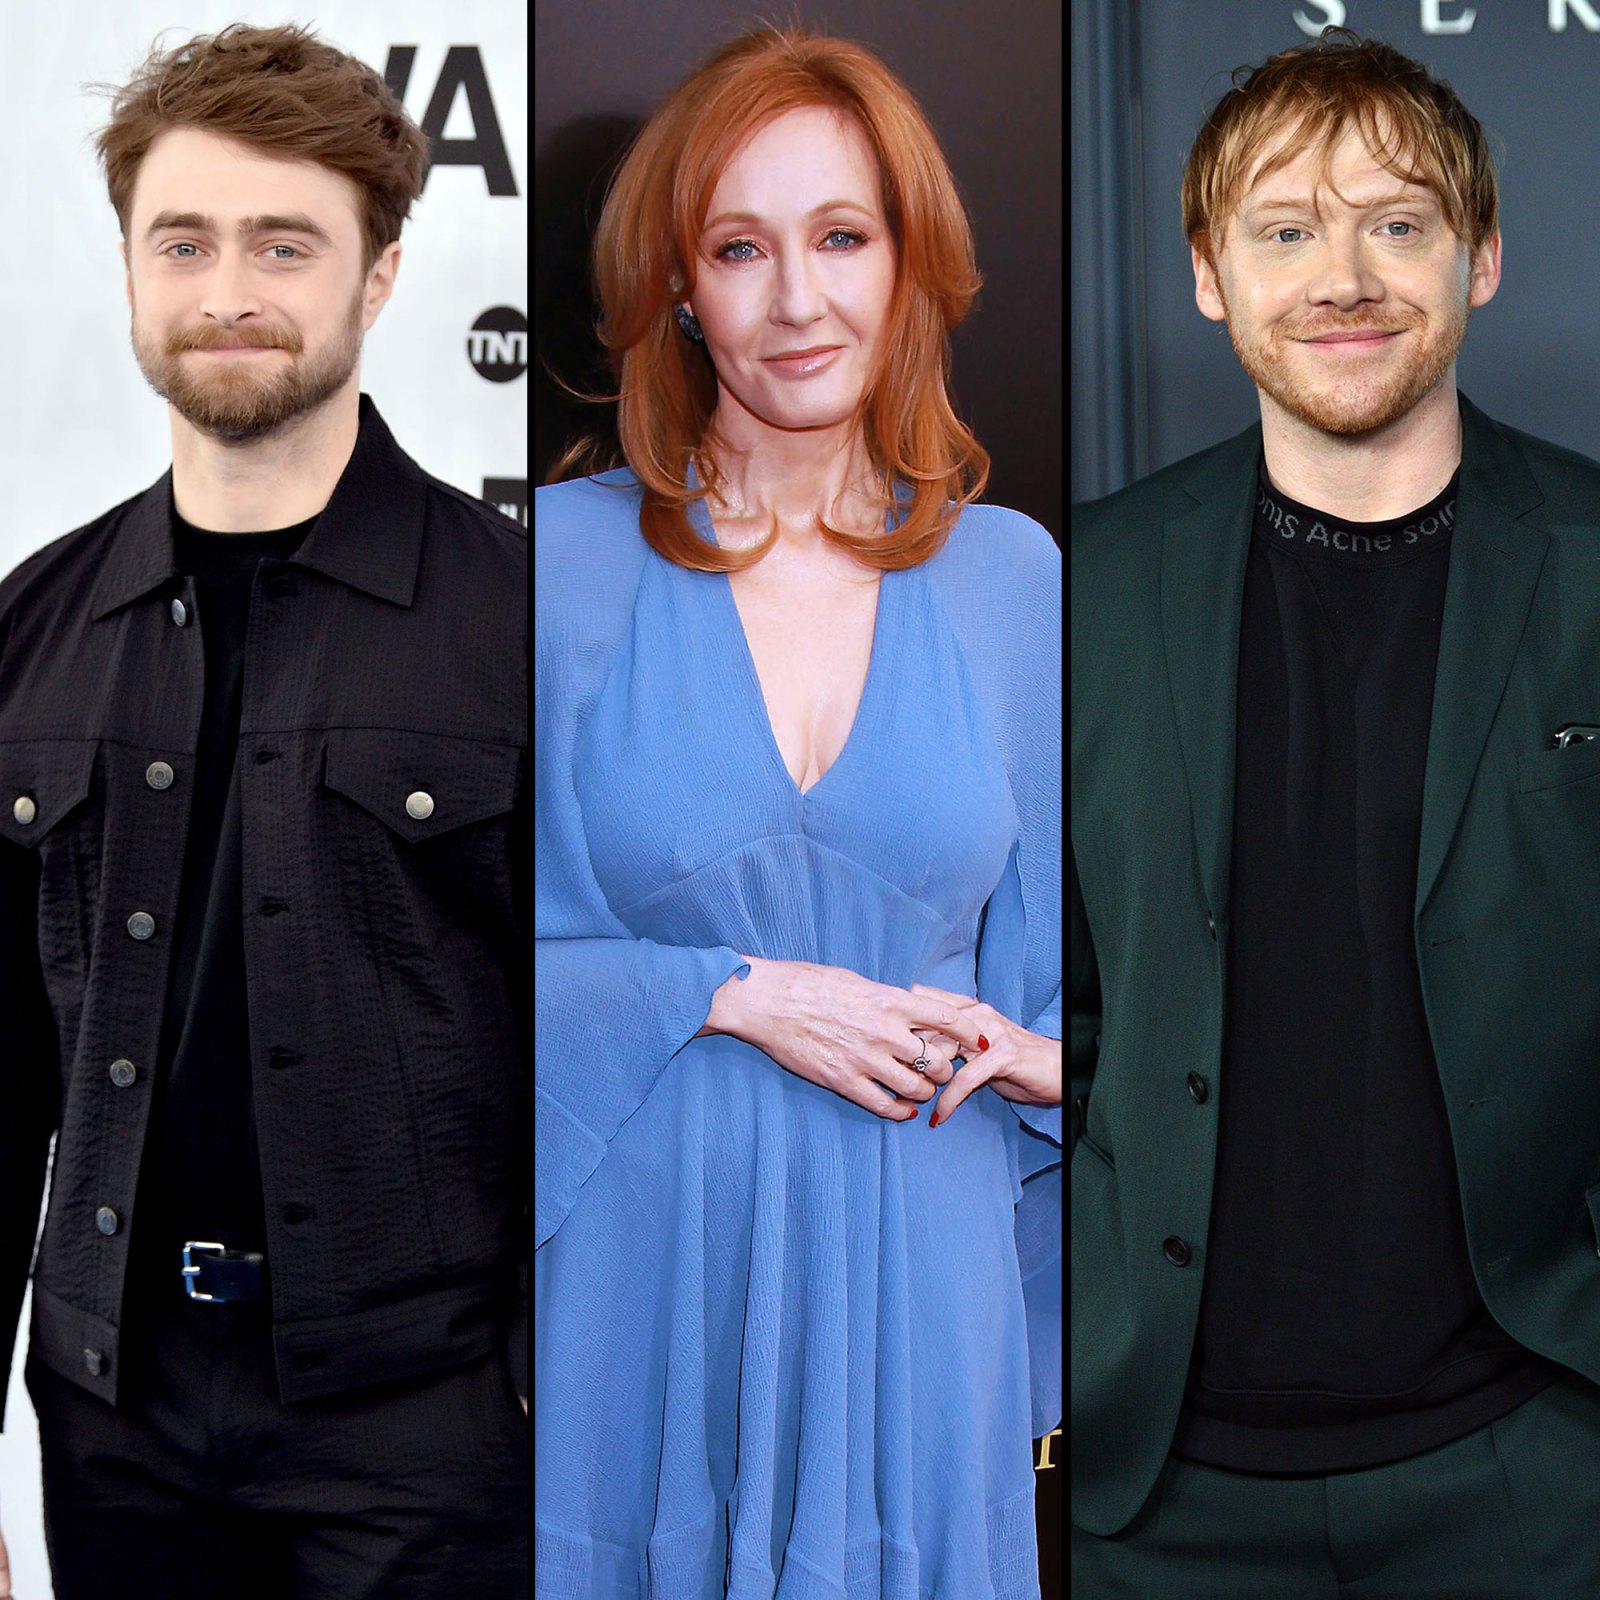 What the Harry Potter Cast Has Said About Where They Stand With JK Rowling